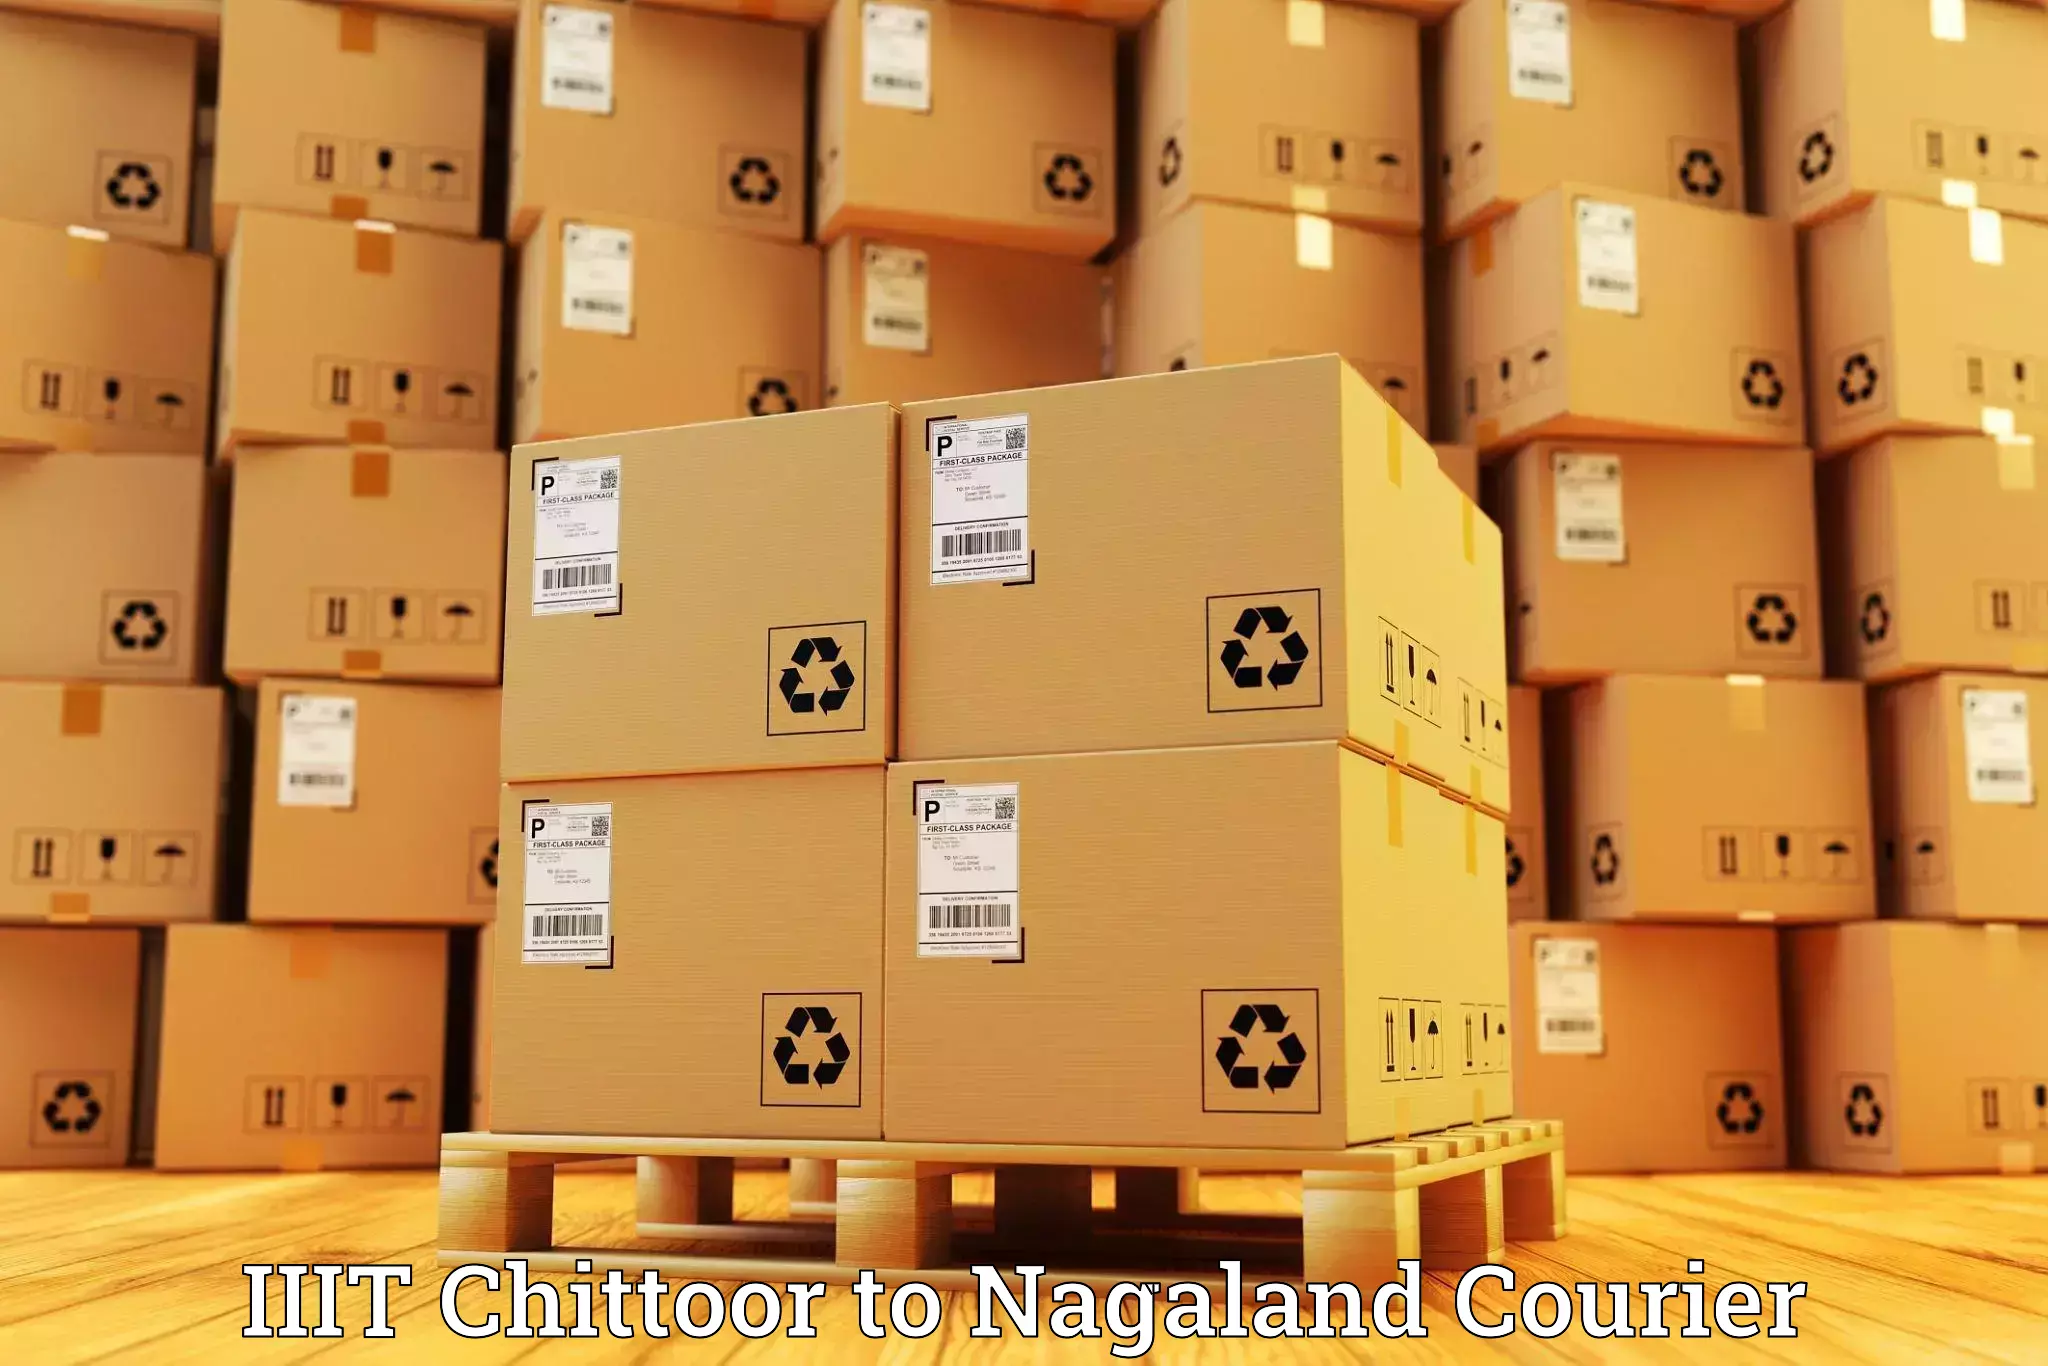 Global courier networks IIIT Chittoor to Nagaland